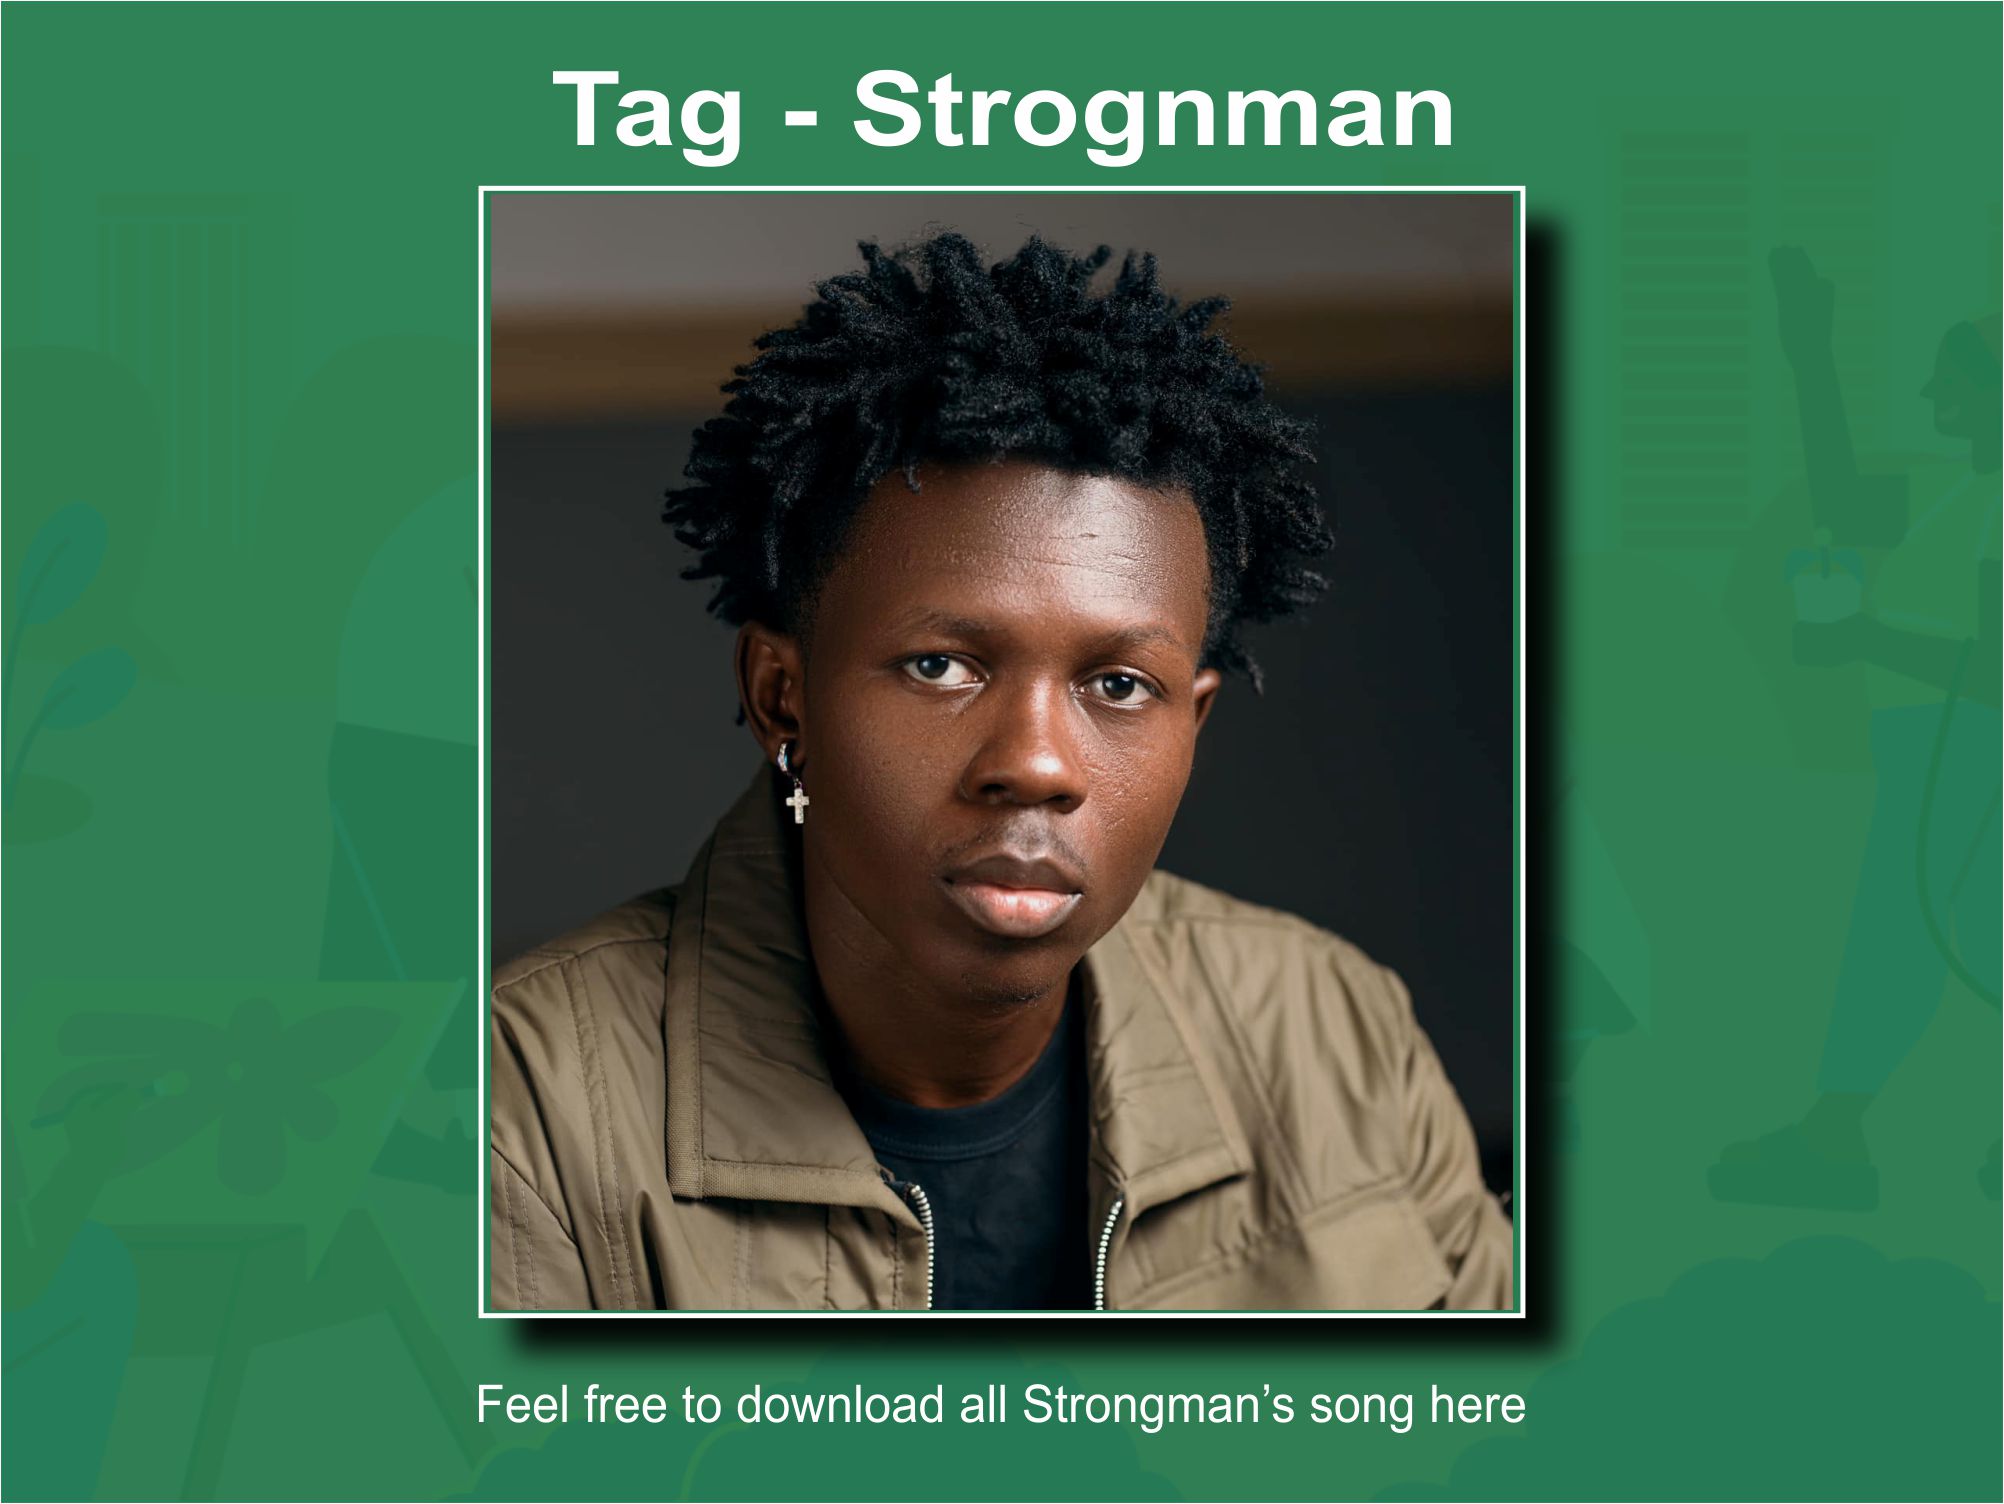 Download Strongman songs all here on 3musicGh.com